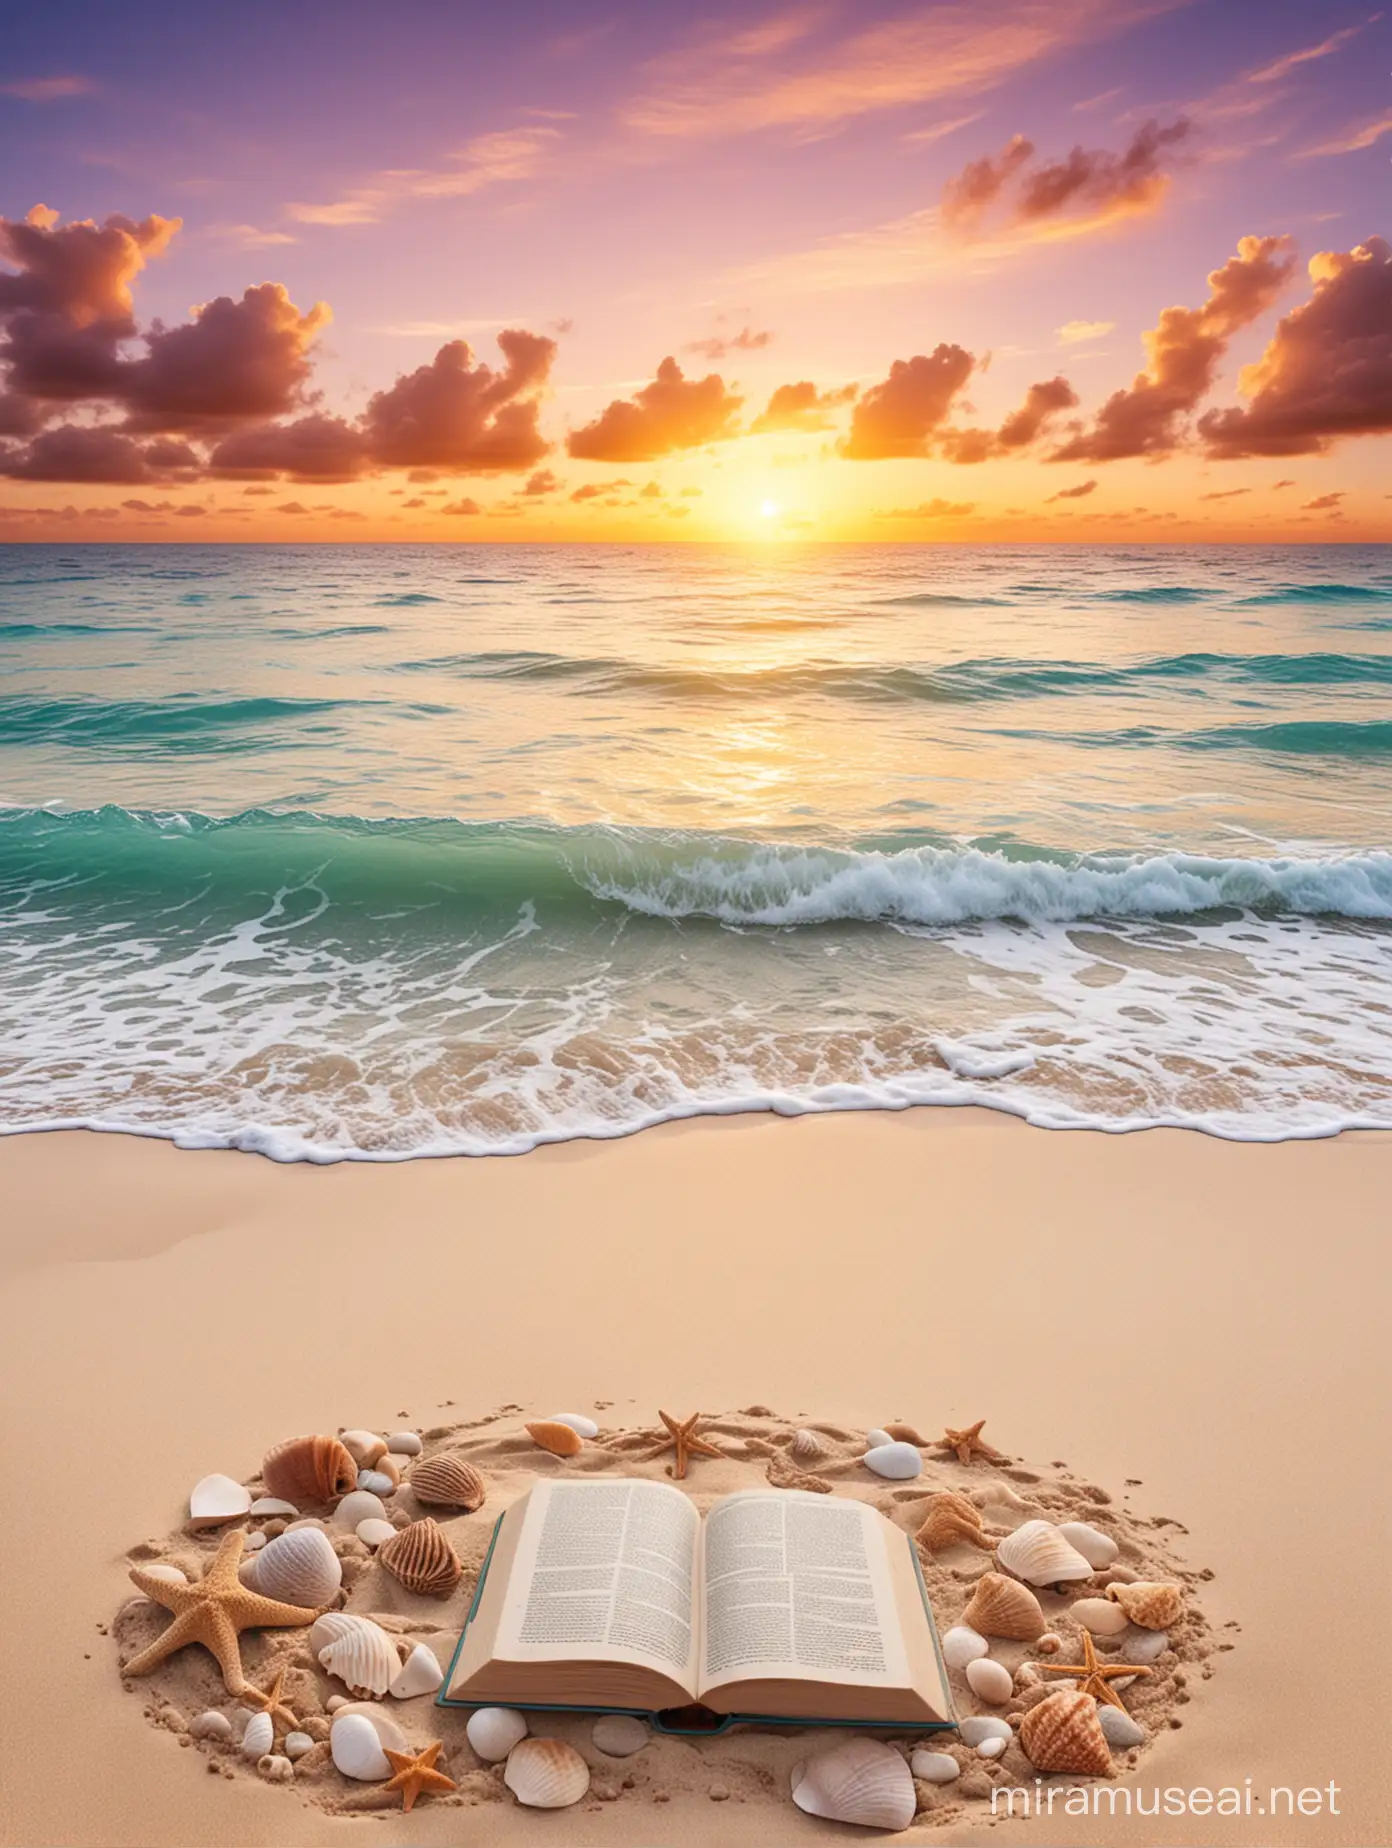 Tranquil Caribbean Beach Sunset with Books and Seashells